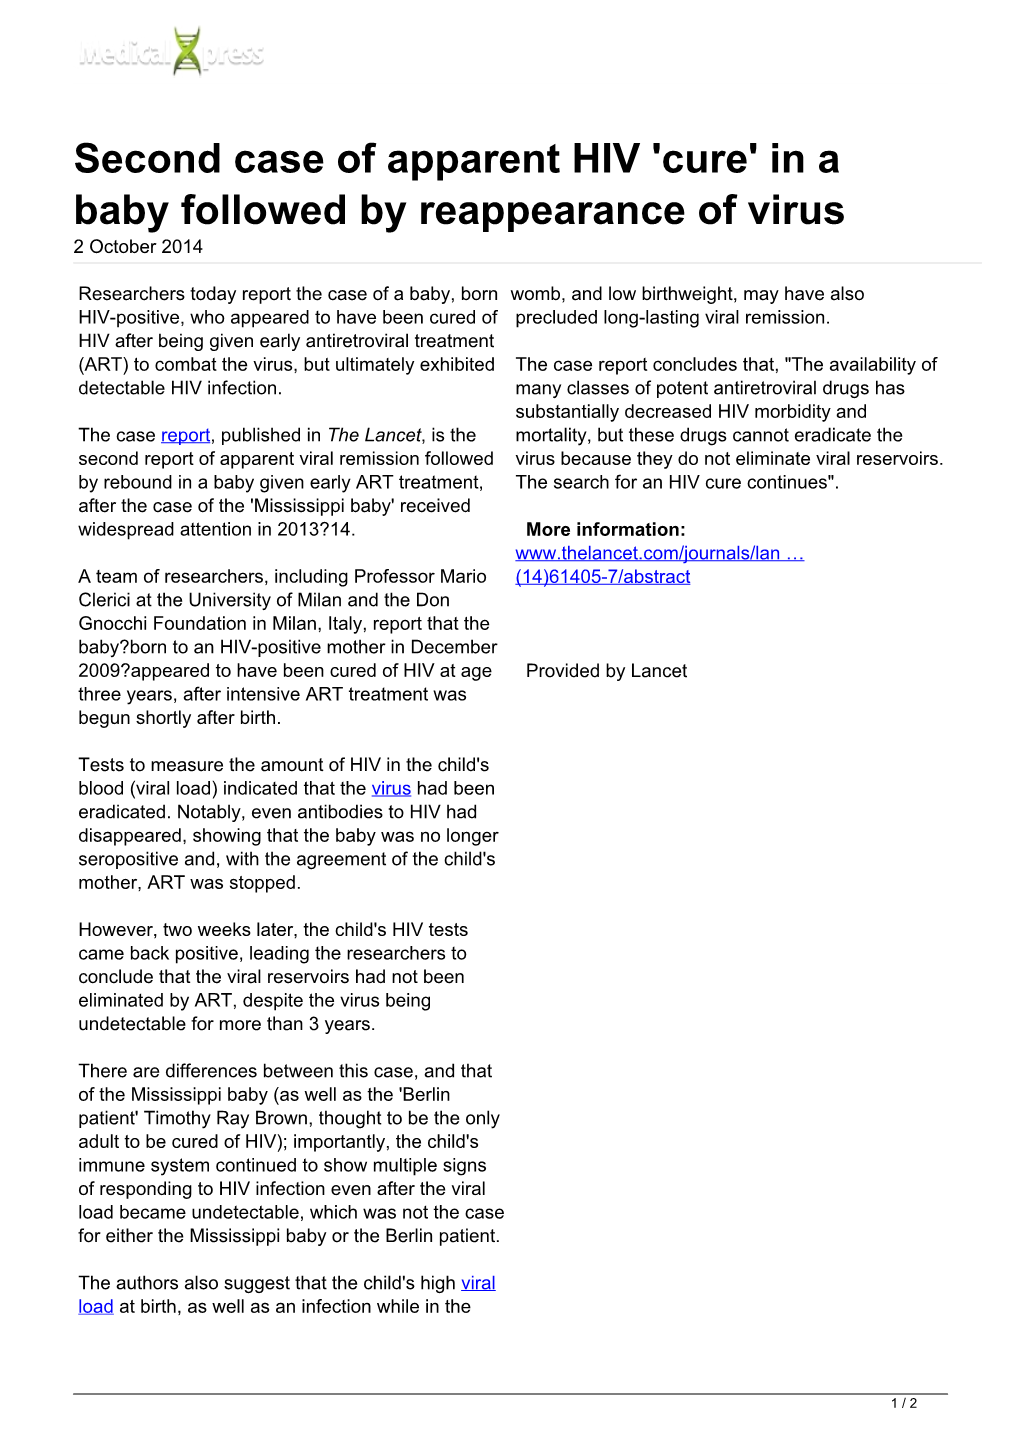 Second Case of Apparent HIV 'Cure' in a Baby Followed by Reappearance of Virus 2 October 2014